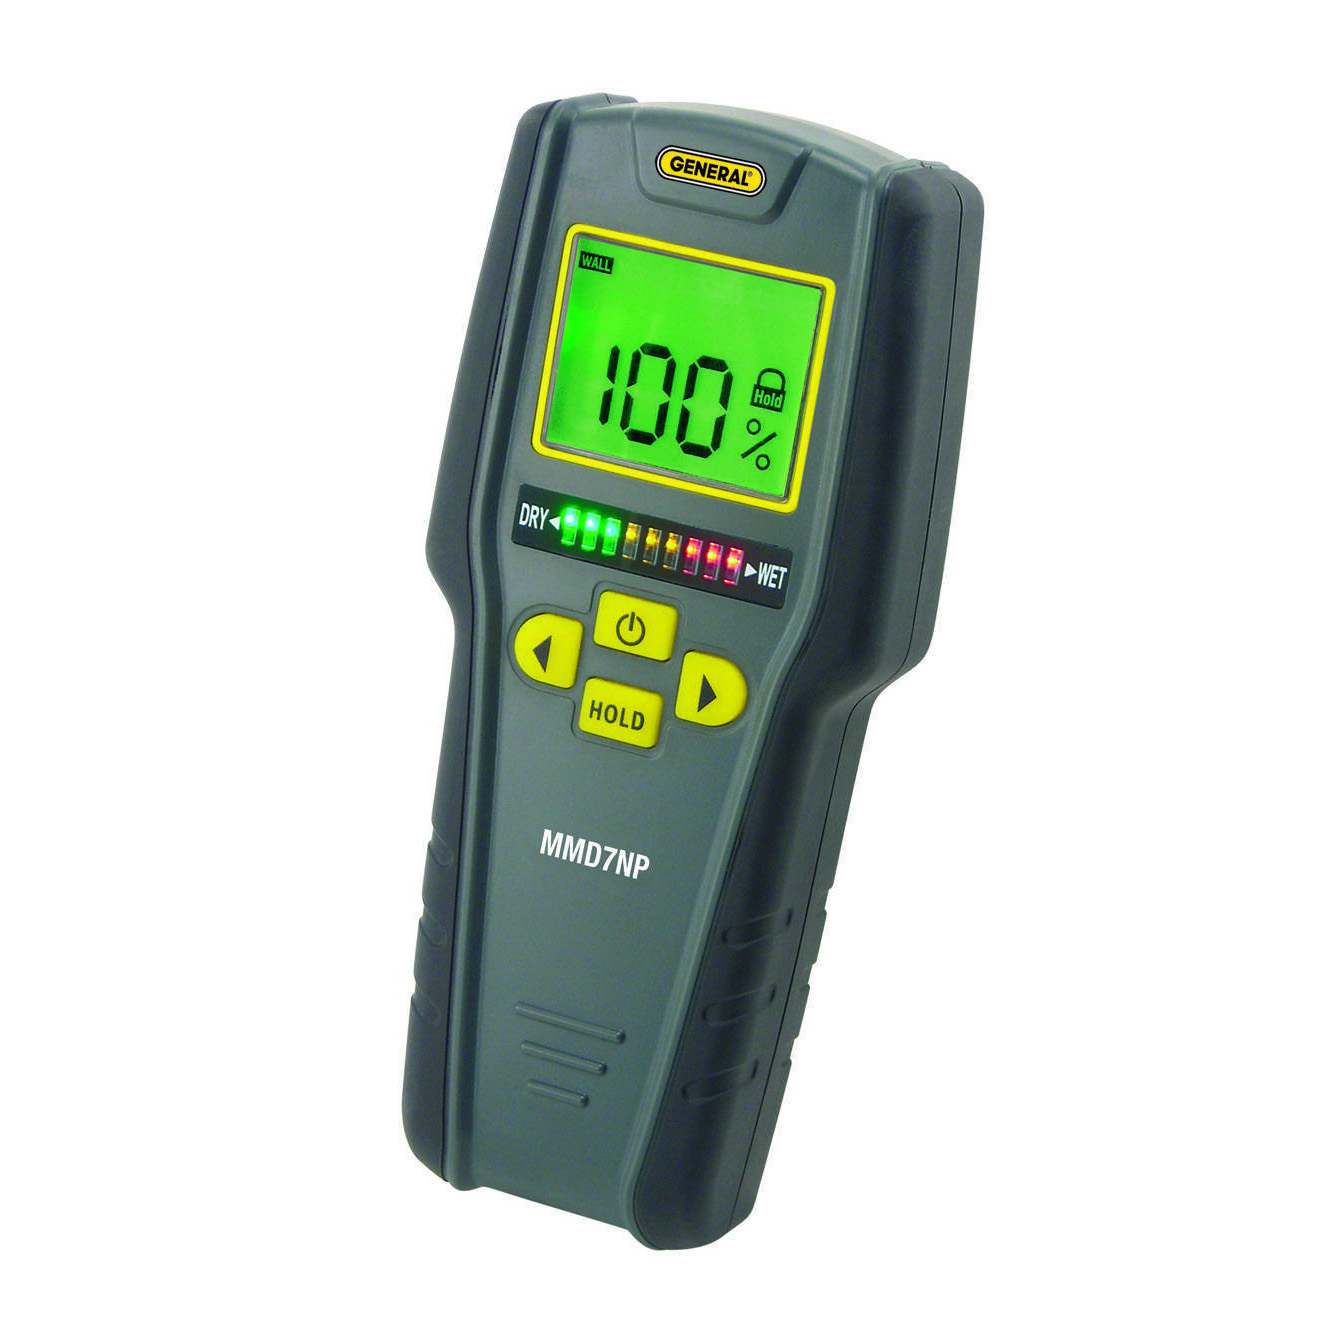 GENERAL MMD7NP Moisture Meter, 0 to 53% Softwood, 0 to 35% Hardwood, +/-4 % Accuracy, LCD Display - 2